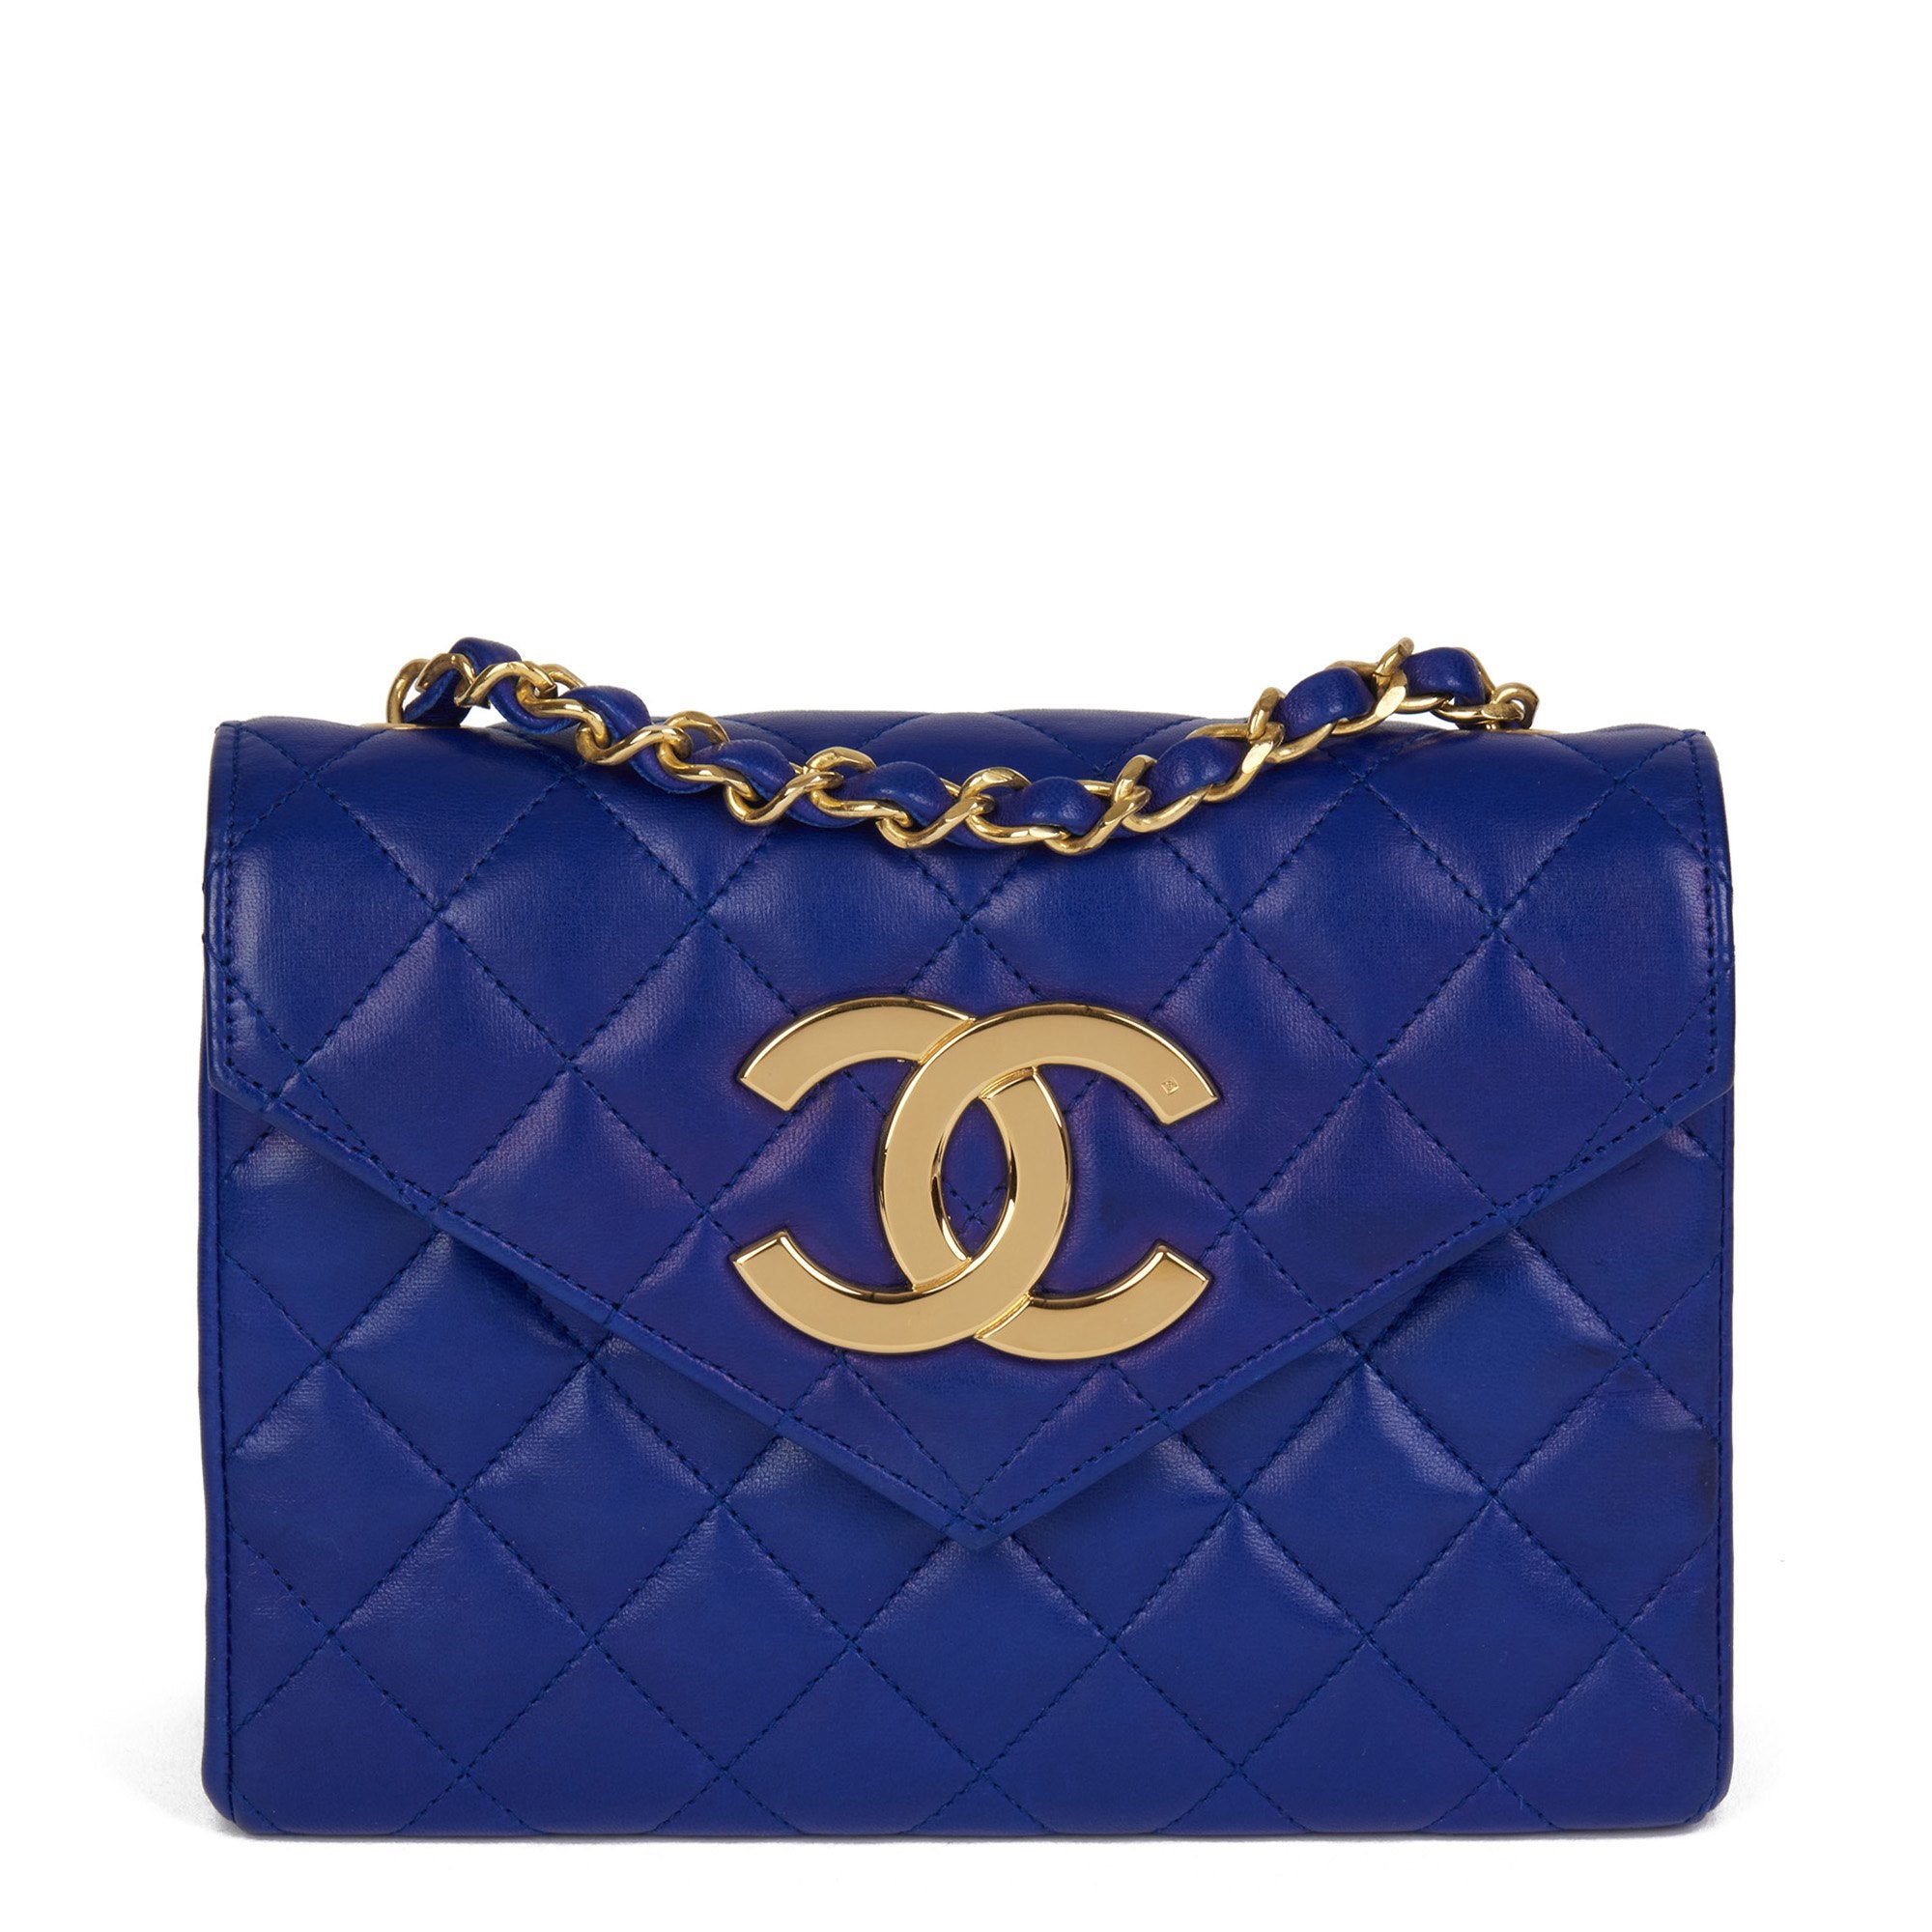 Chanel Electric Blue Quilted Lambskin Vintage XL Mini Flap Bag